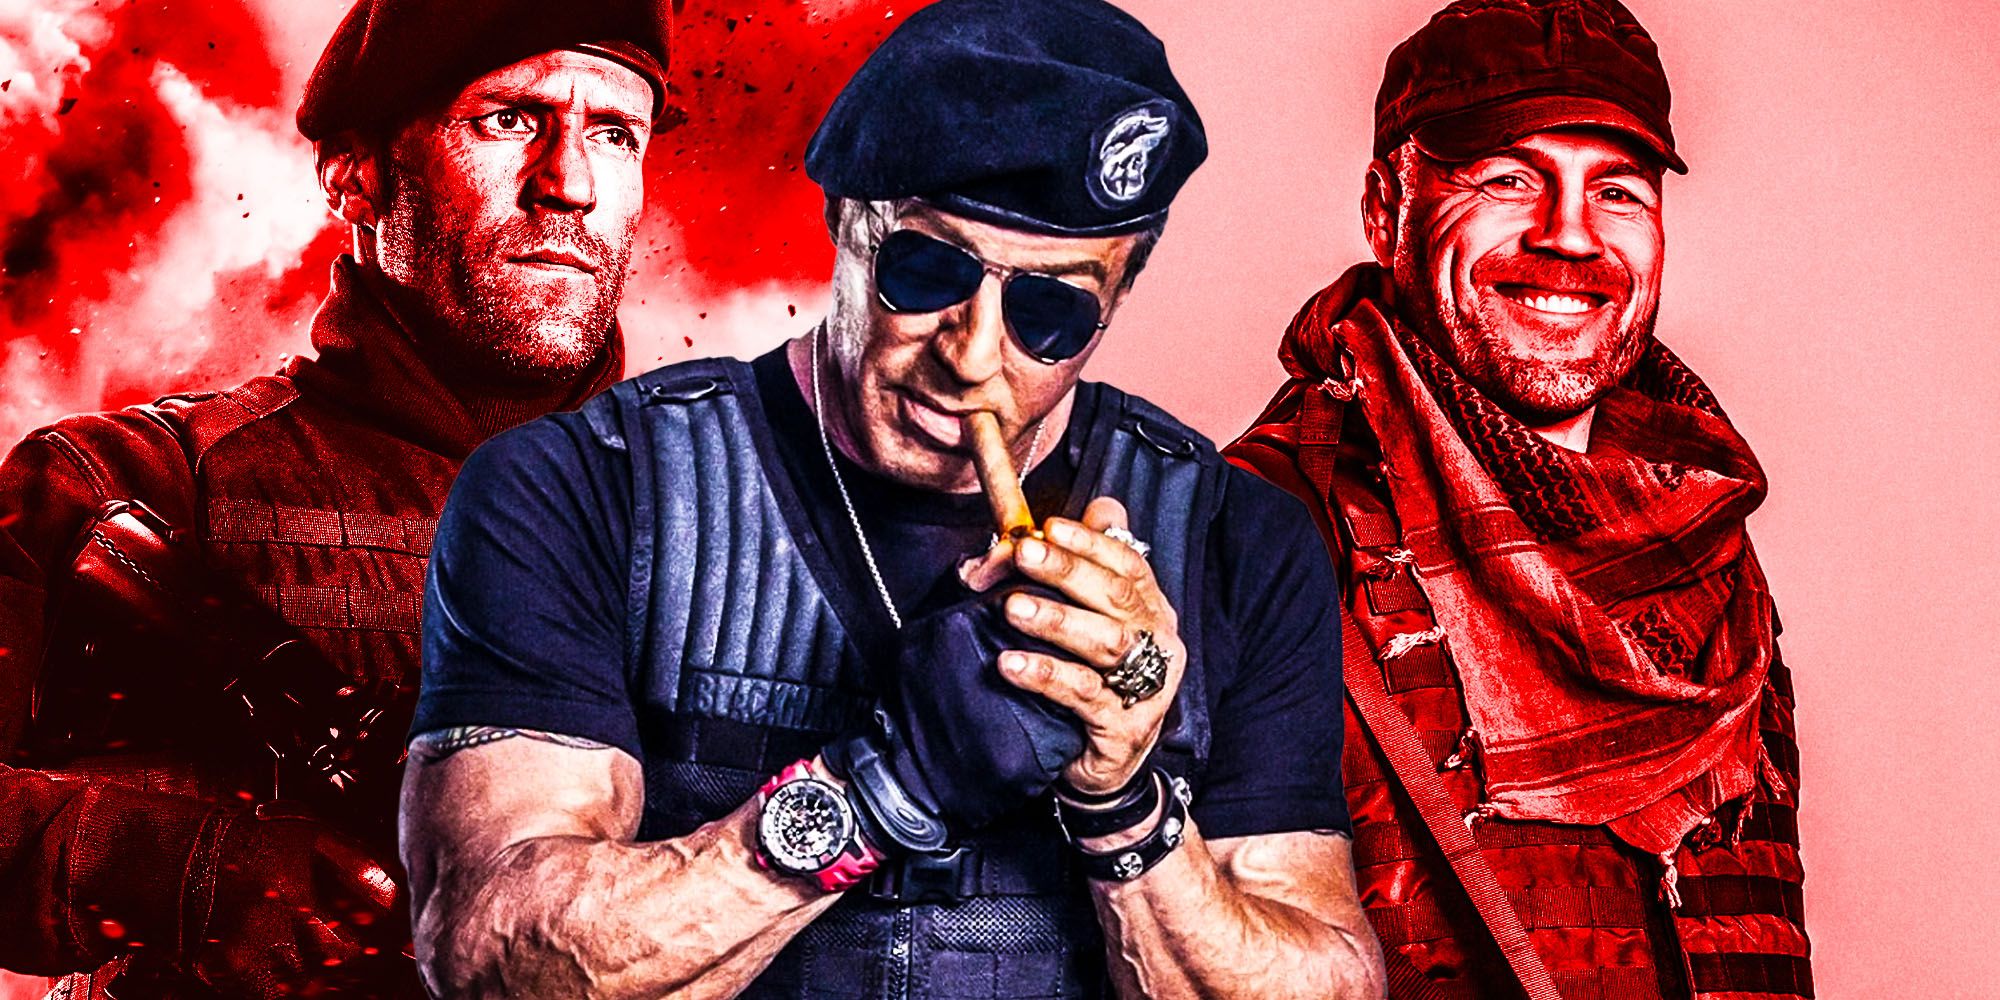 Expendables 4 Sylvester stallone Jason Statham Randy Couture